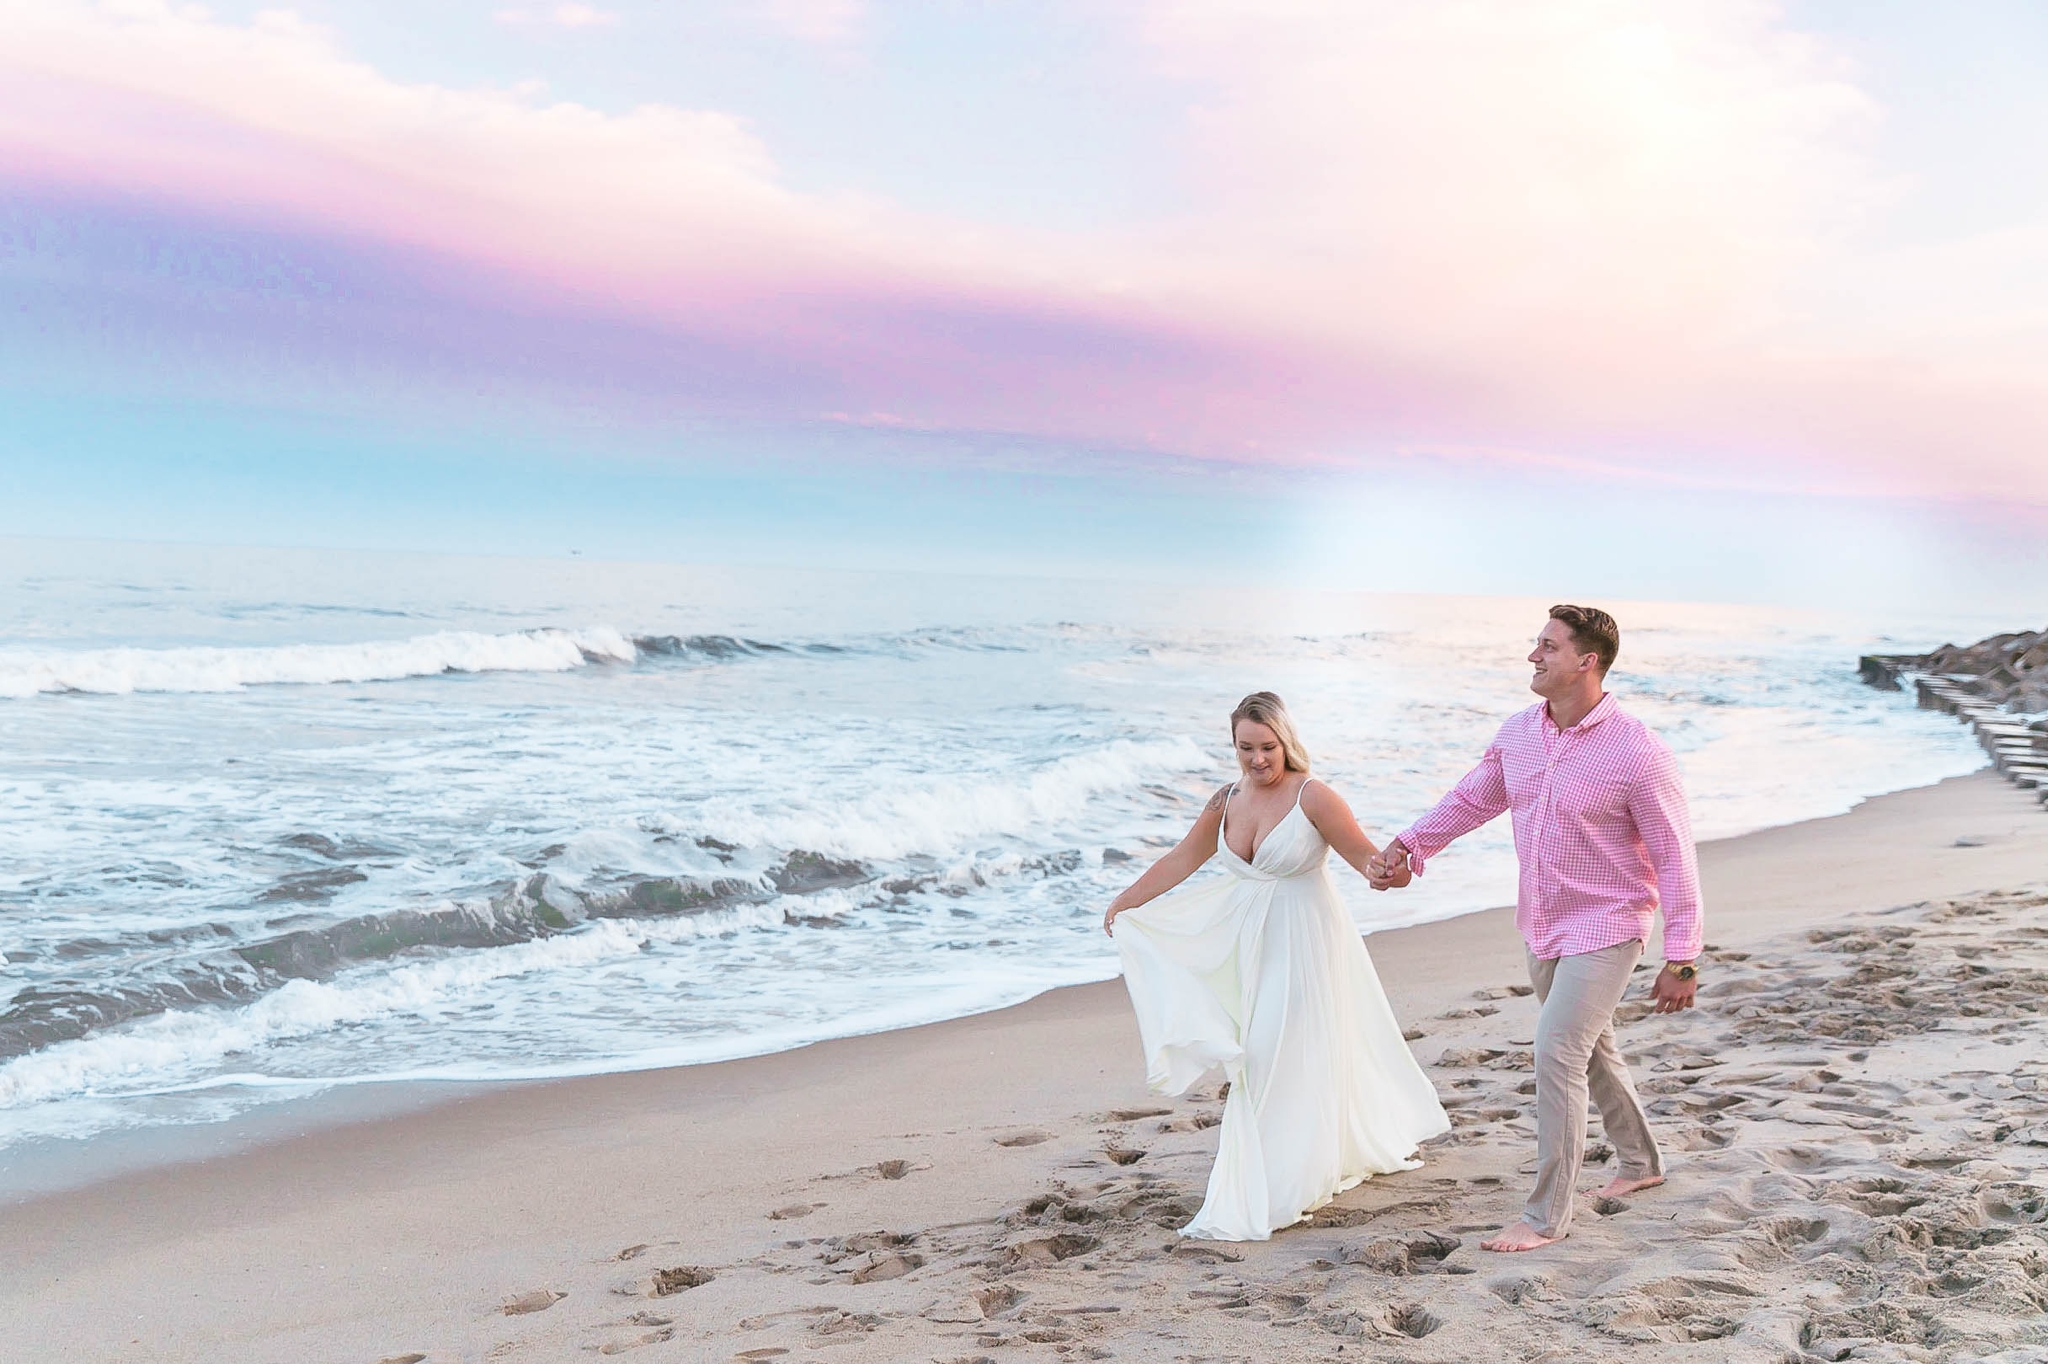  Romantic Engagement Photography Session at the beach during sunset with a cotton candy sky - couple is walking in the sand - girl is wearing a white flowy maxi dress from lulus - Honolulu Oahu Hawaii Wedding Photographer - Johanna Dye 